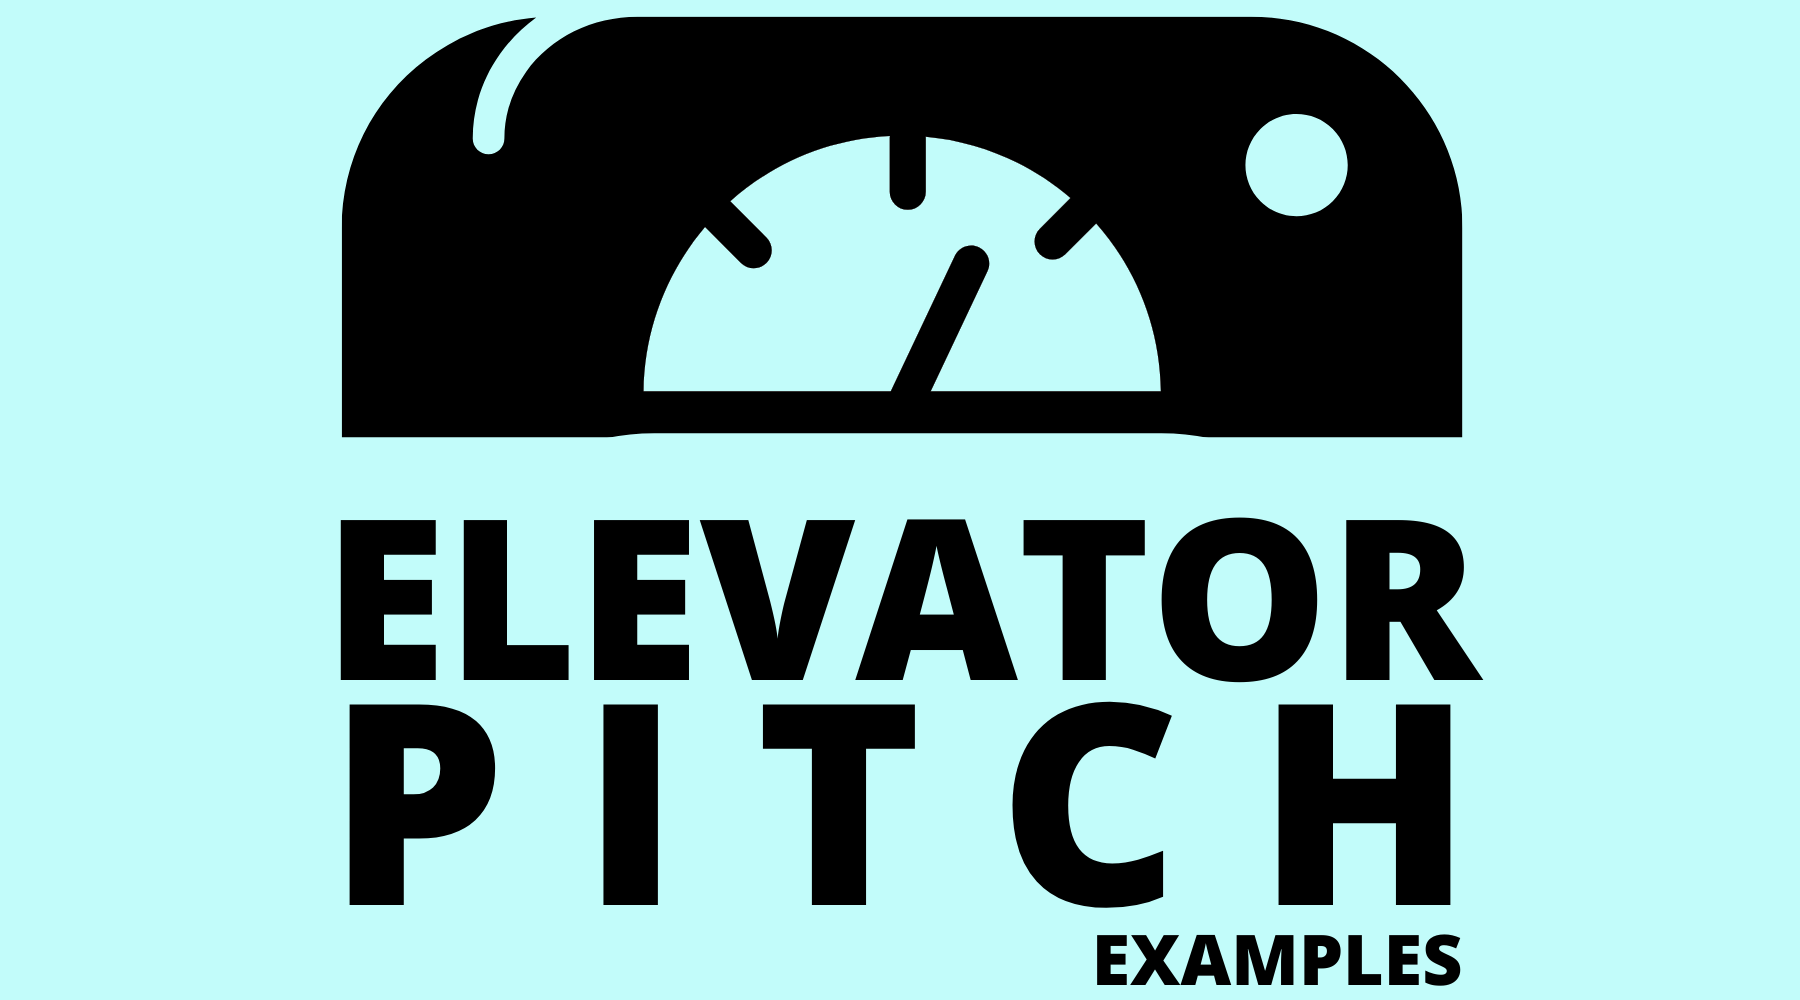 Examples of Elevator pitches and How It Can Prove to Be a Game Changer